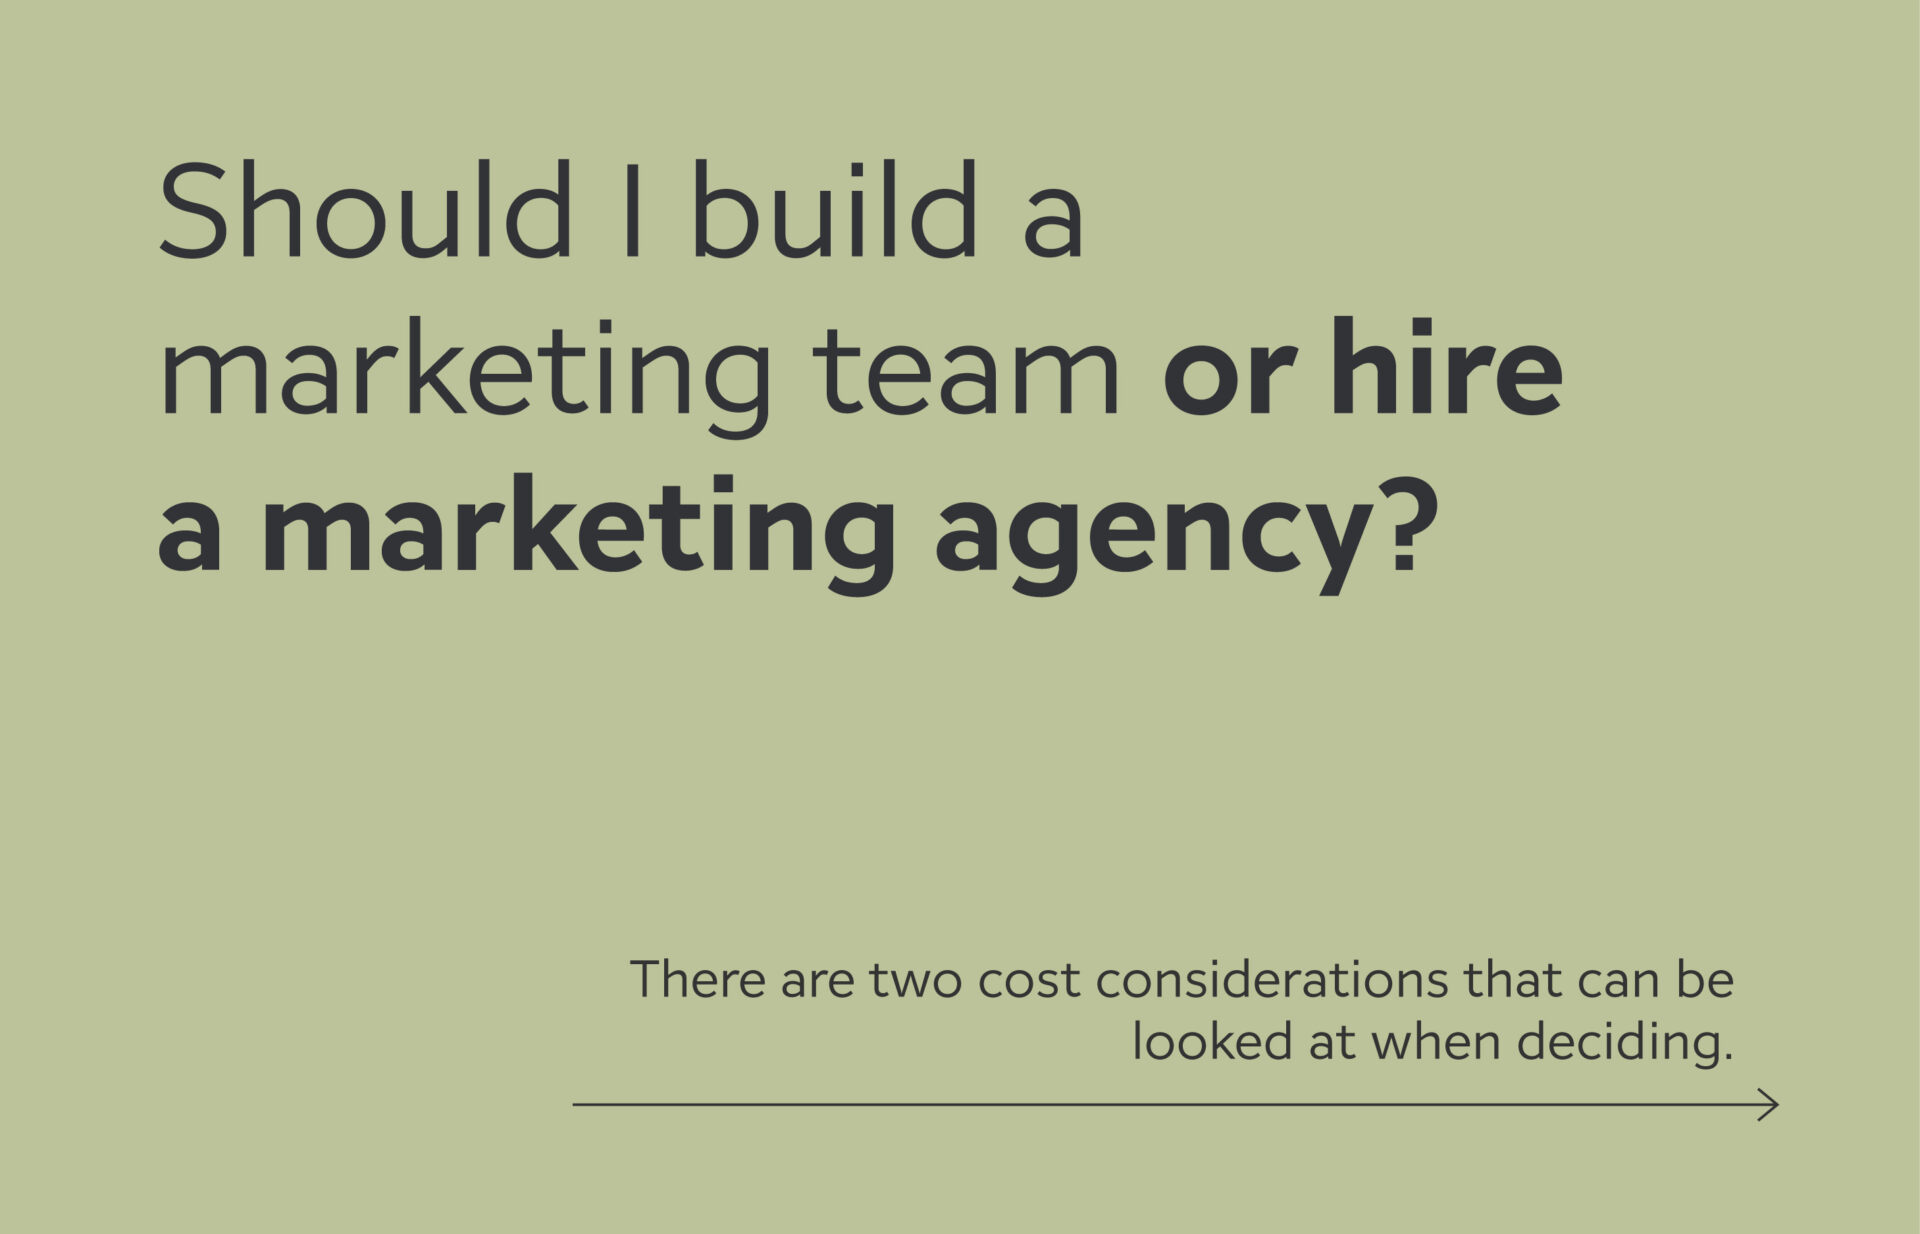 Should you build a marketing team or hire a marketing agency?